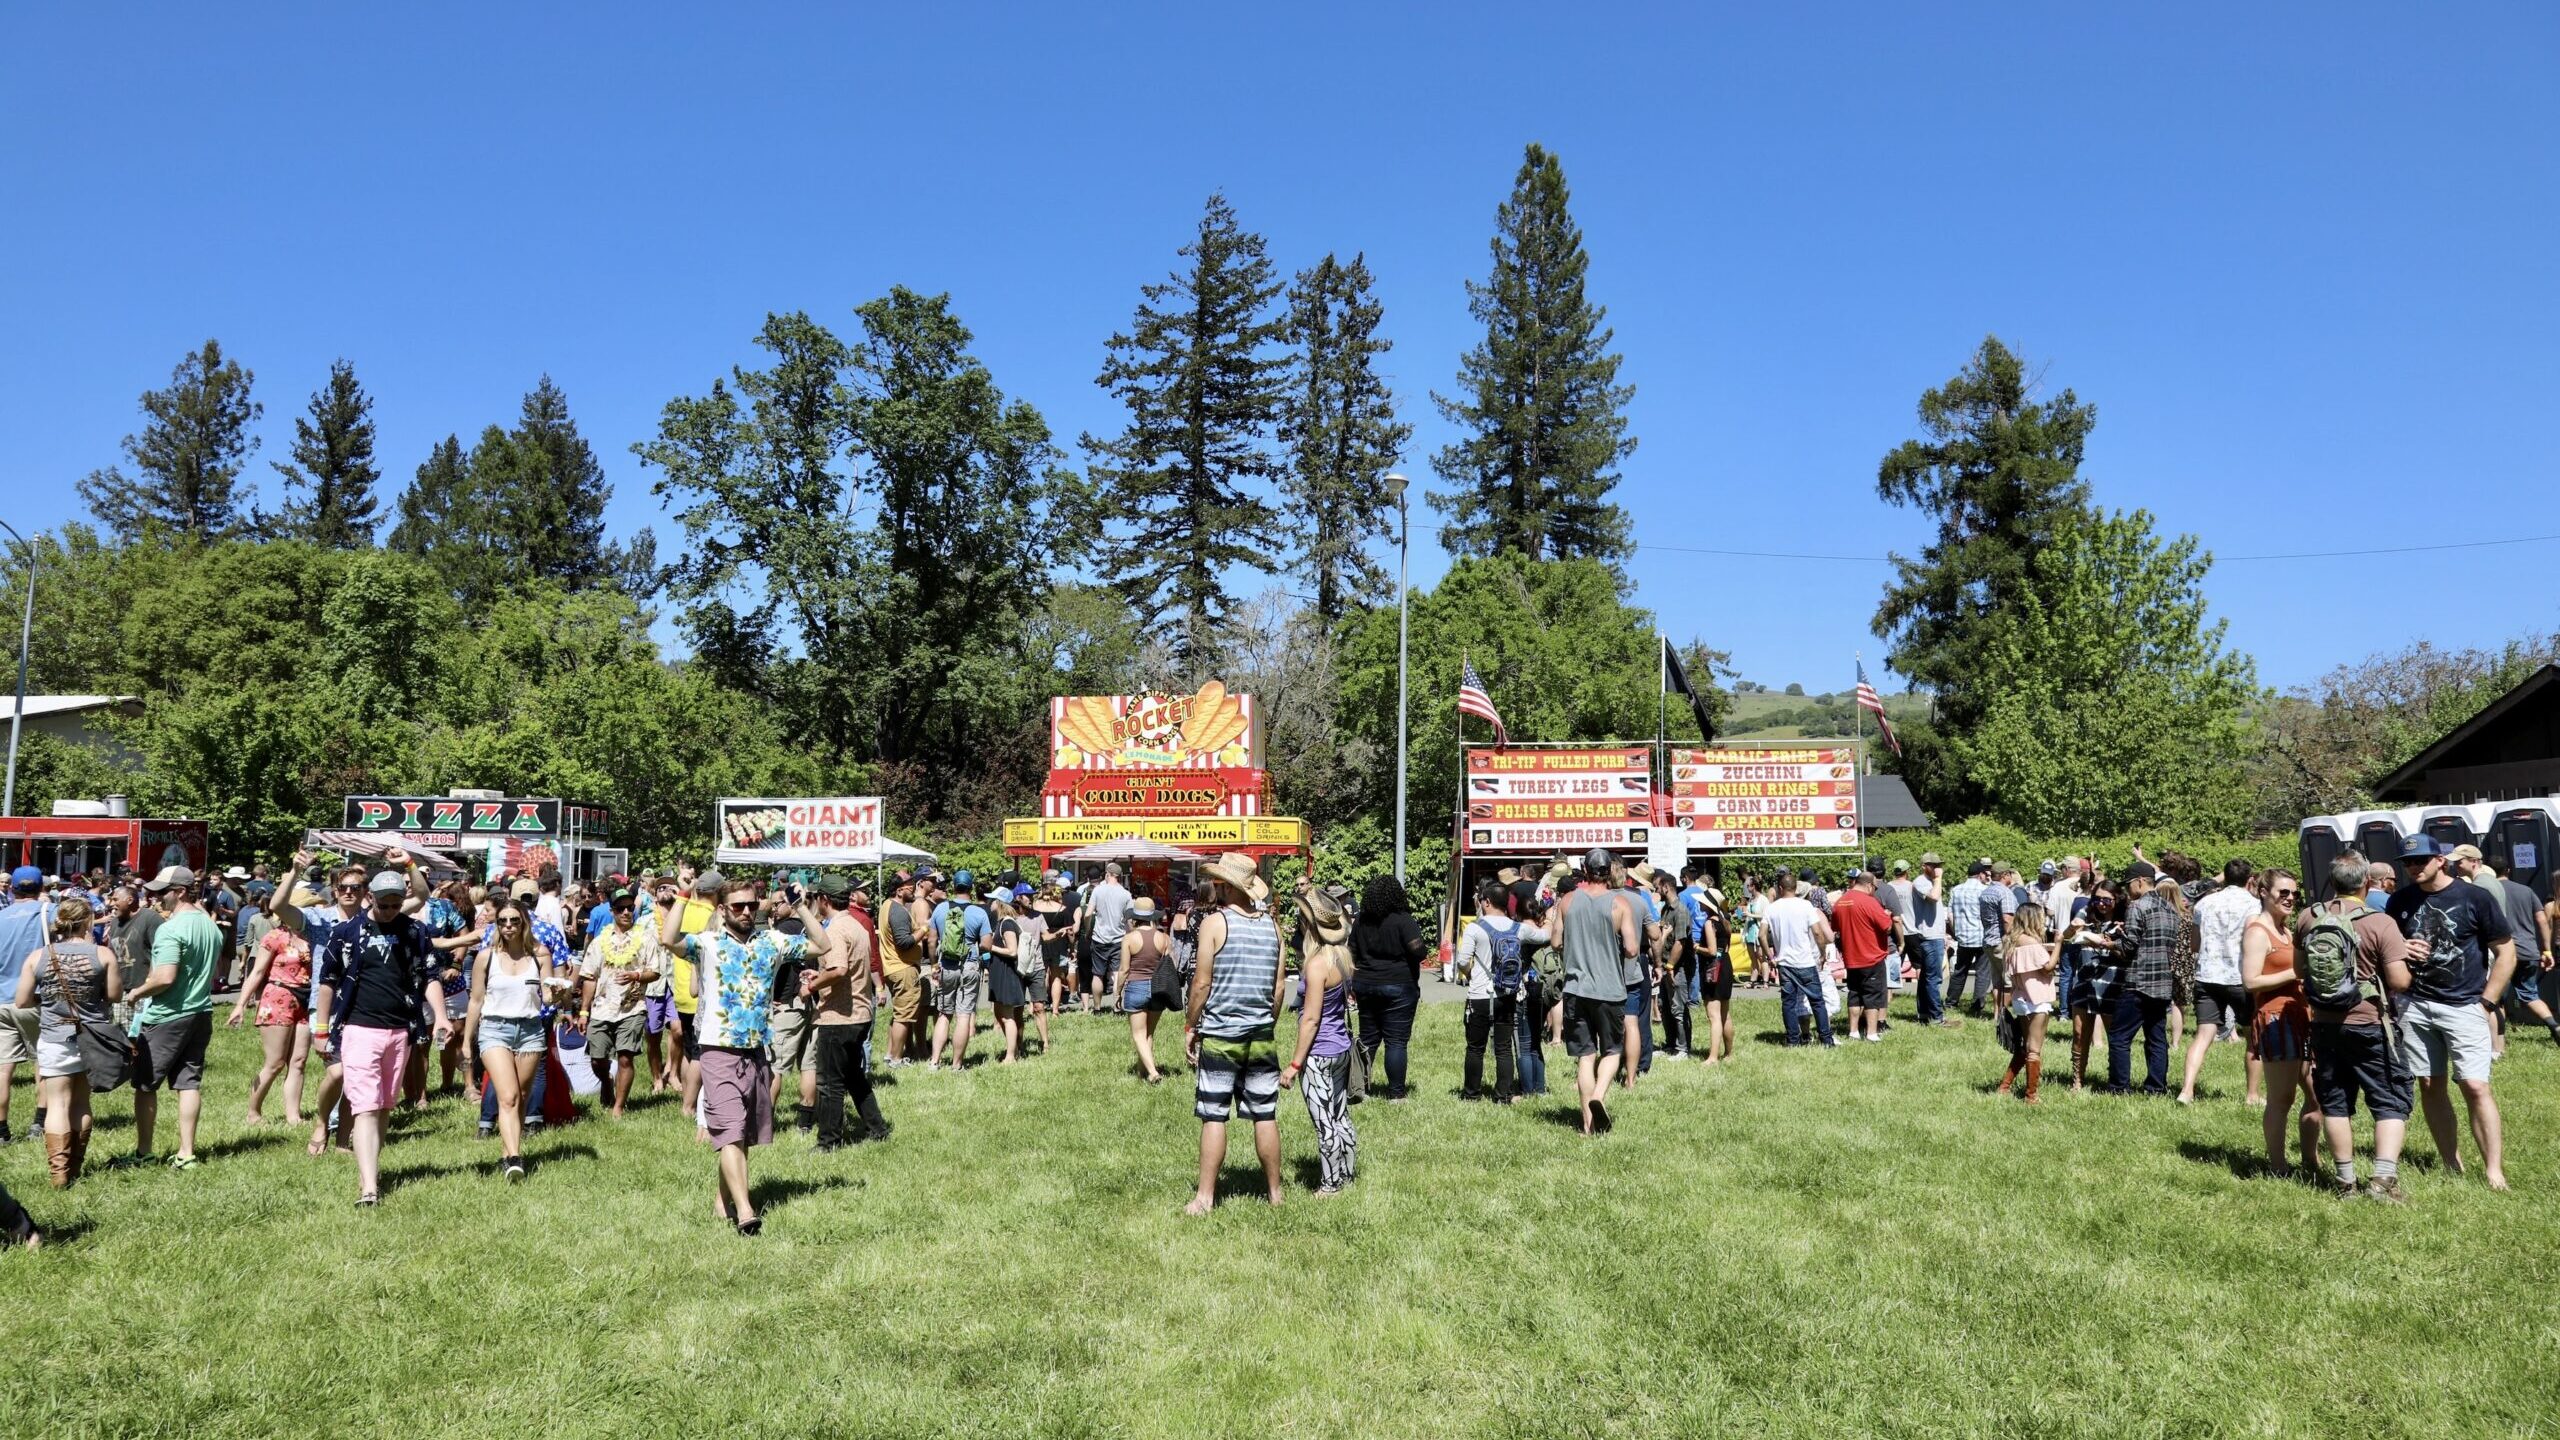 Boonville Beer Festival 2023 Dates Announced